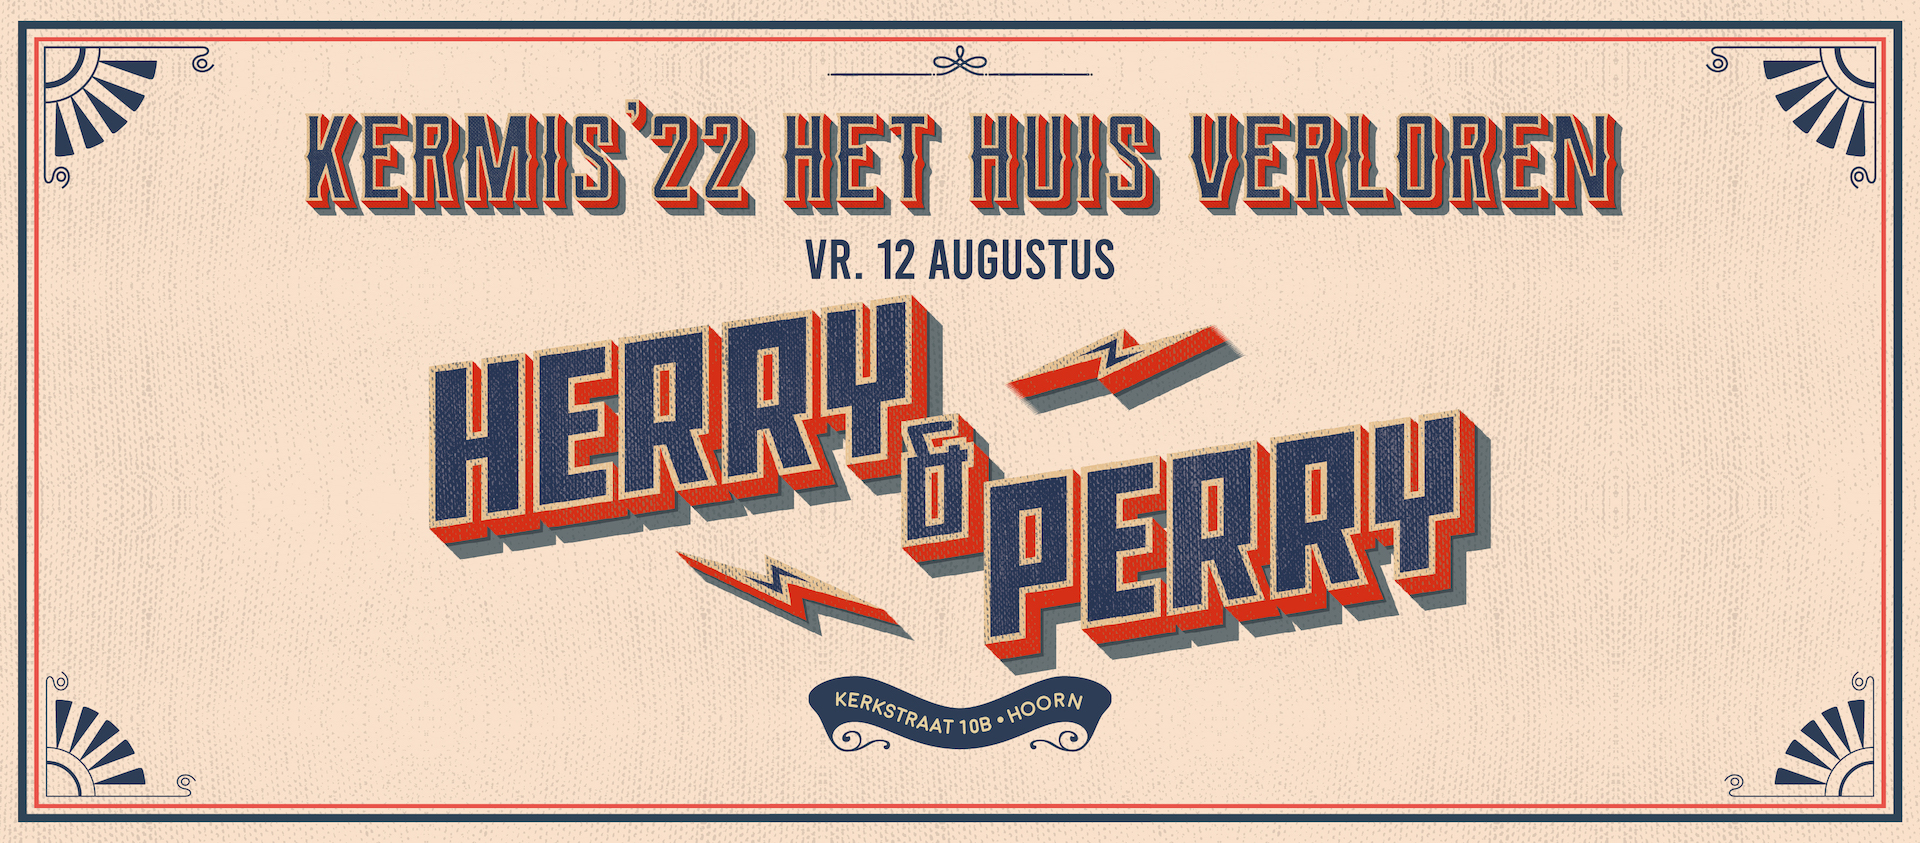 Herry & Perry Live!